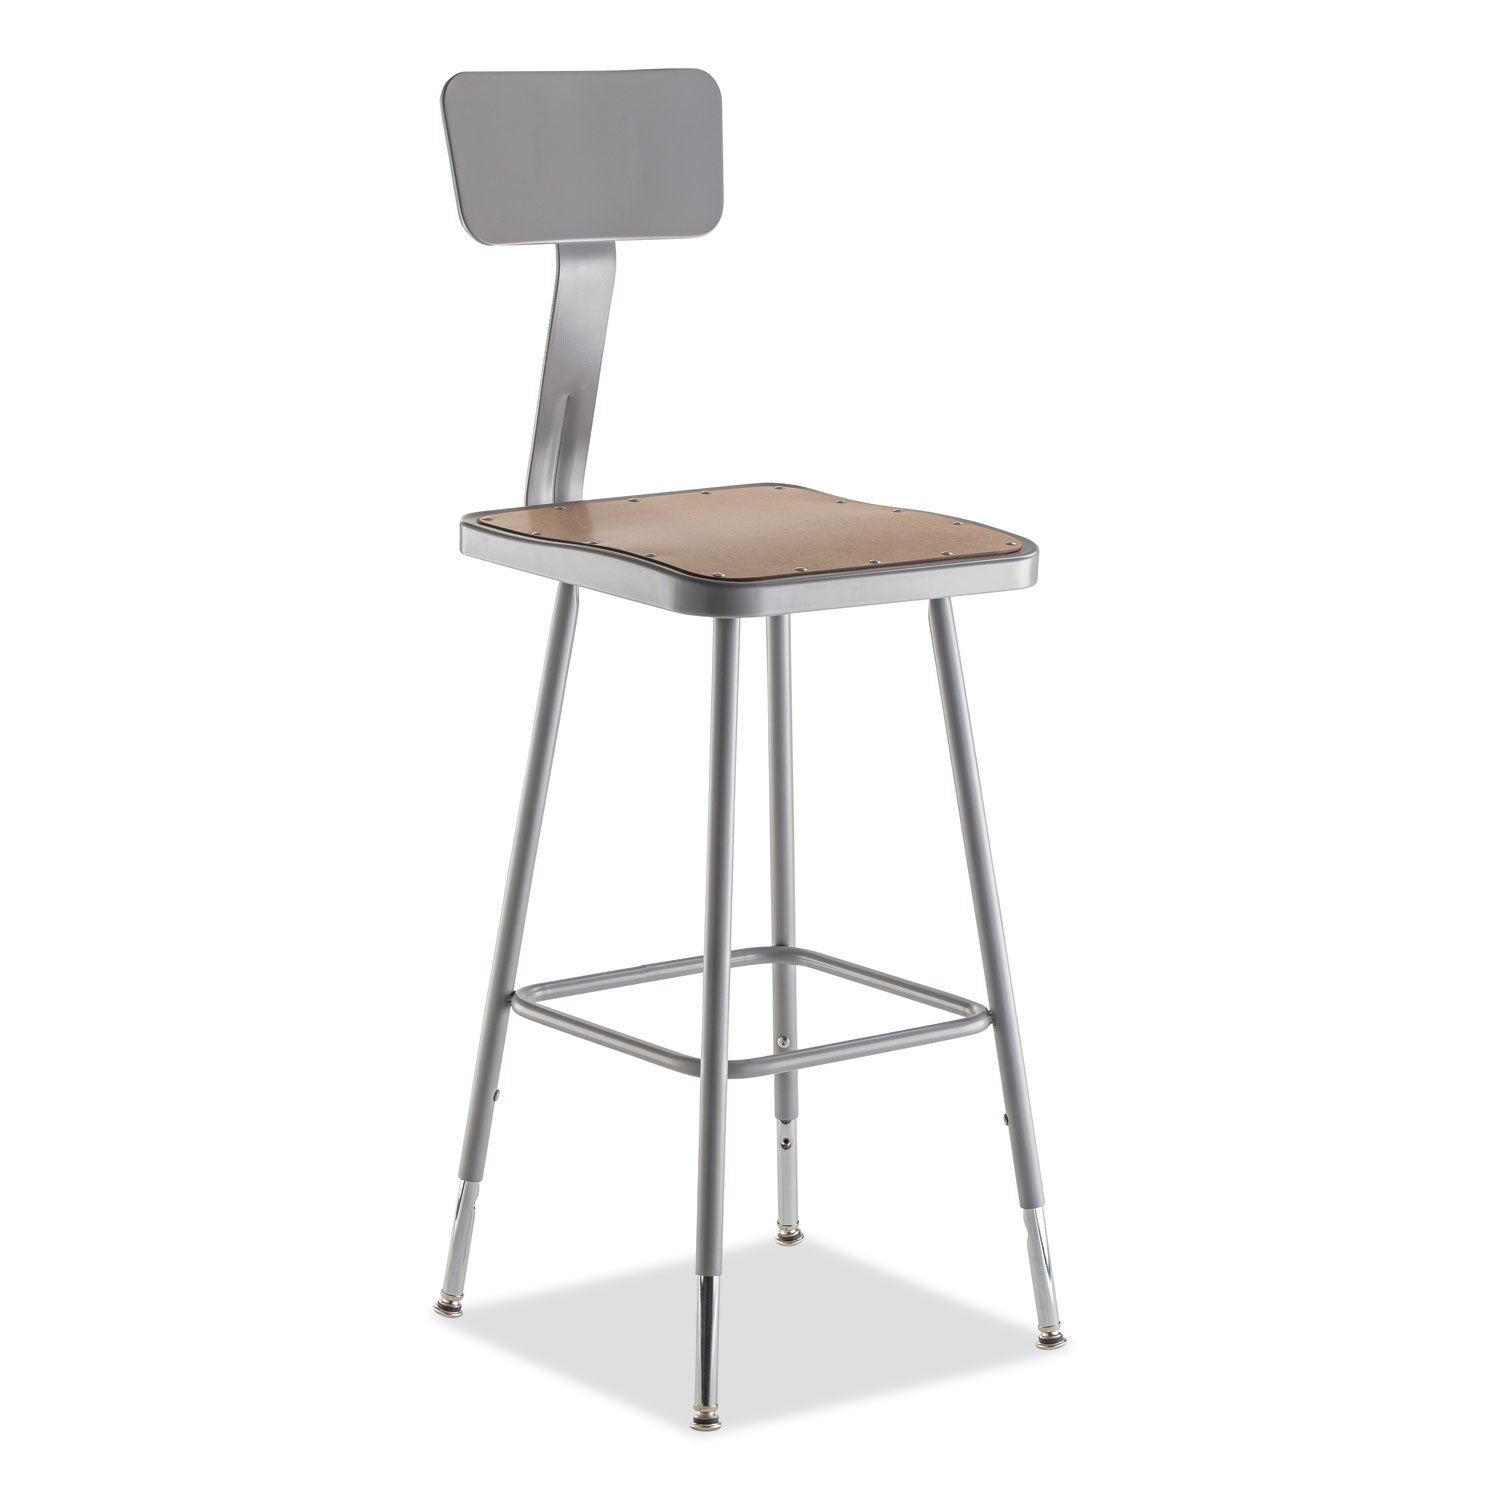 6300-series-height-adj-hd-square-seat-stool-w-back-supports-500-lb-2375-3175-seat-ht-brown-gray-ships-in-1-3-bus-days_nps6324hb - 1